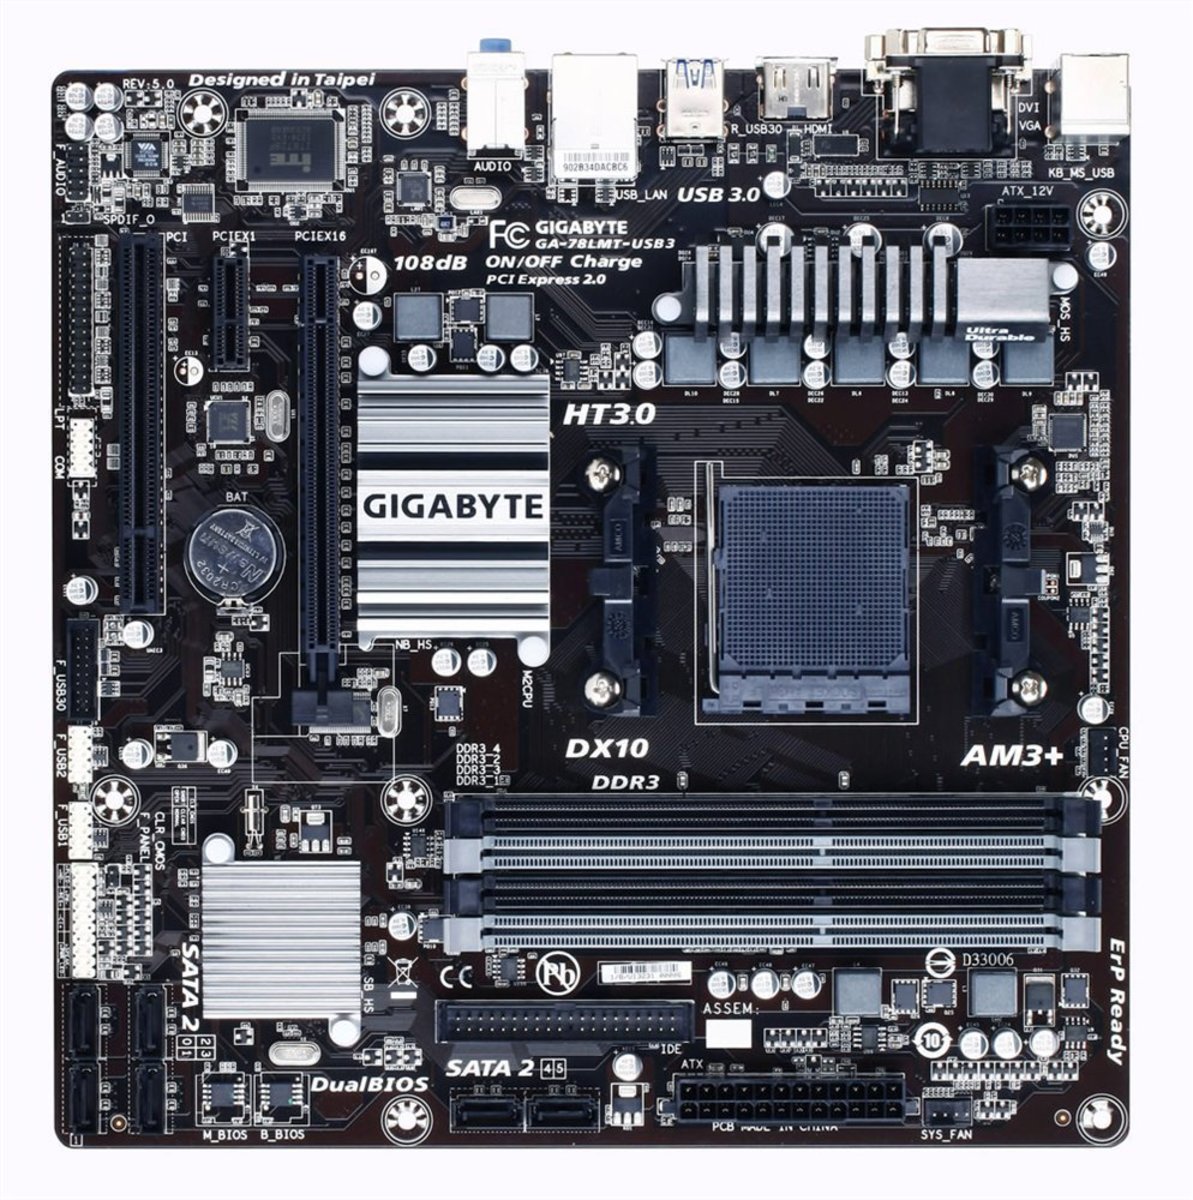 5 Good AMD AM3+ and FM2+ Gaming Motherboards | TurboFuture